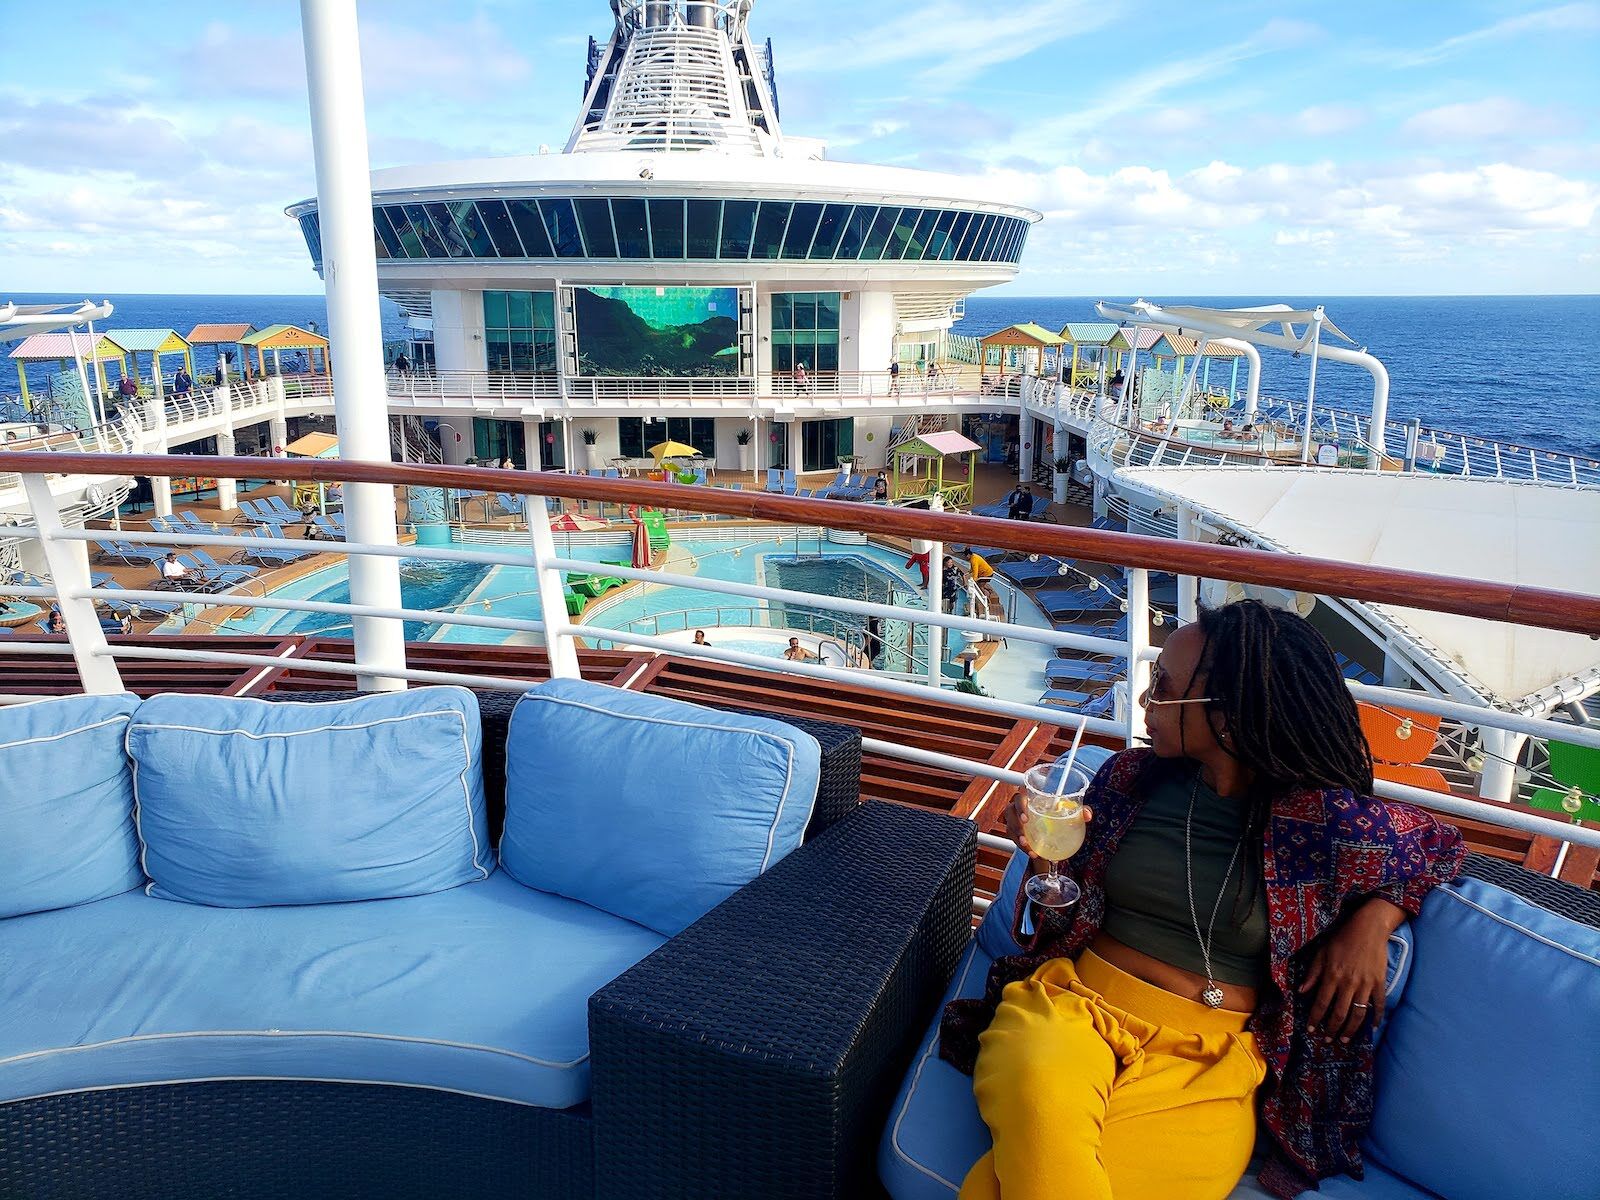 Tshego Letsoalo sips a cocktail on the deck of the Navigator of the Seas, a brand-new cruise ship. Tshego took a cruise during Omicron.